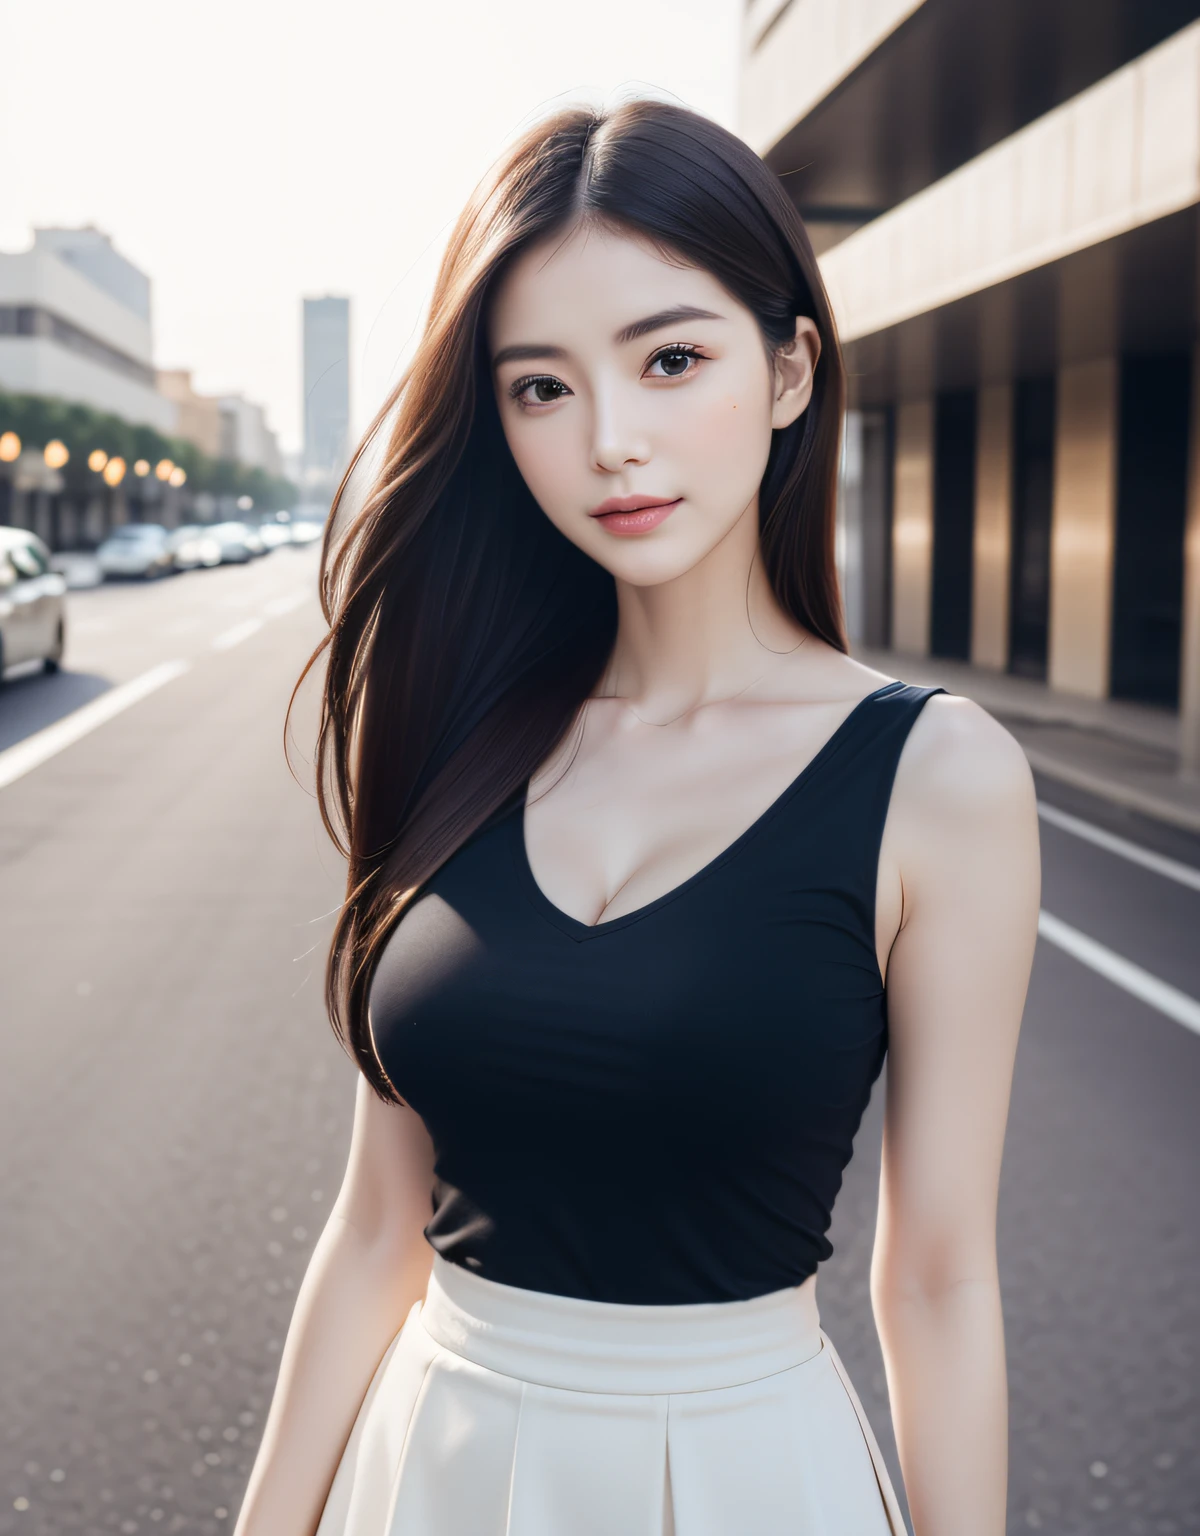 best quality, white skin, real human skin, (detailed face), oval face, pores, ultra high res, (8k, RAW photo, photorealistic:1.4), 1girl, slim, (large-breast:1.37, cleavage), (looking straight at viewer with a serene and goddess-like happiness:1.2, stylish model posing:1.3, arms behind back), (lifter gloss, eyelashes, gloss-face, best quality, ultra highres, Broad lighting, natural shading), lovely look, (black V-neck T-shirt:1.3, high-waist-box-skirt:1.3), cityscape, fashion street venue, arms behind back:1.3, burry background, bokeh, depth of field, (cowboy shot:1.3), centered image, perfect anatomy, perfect proportion,